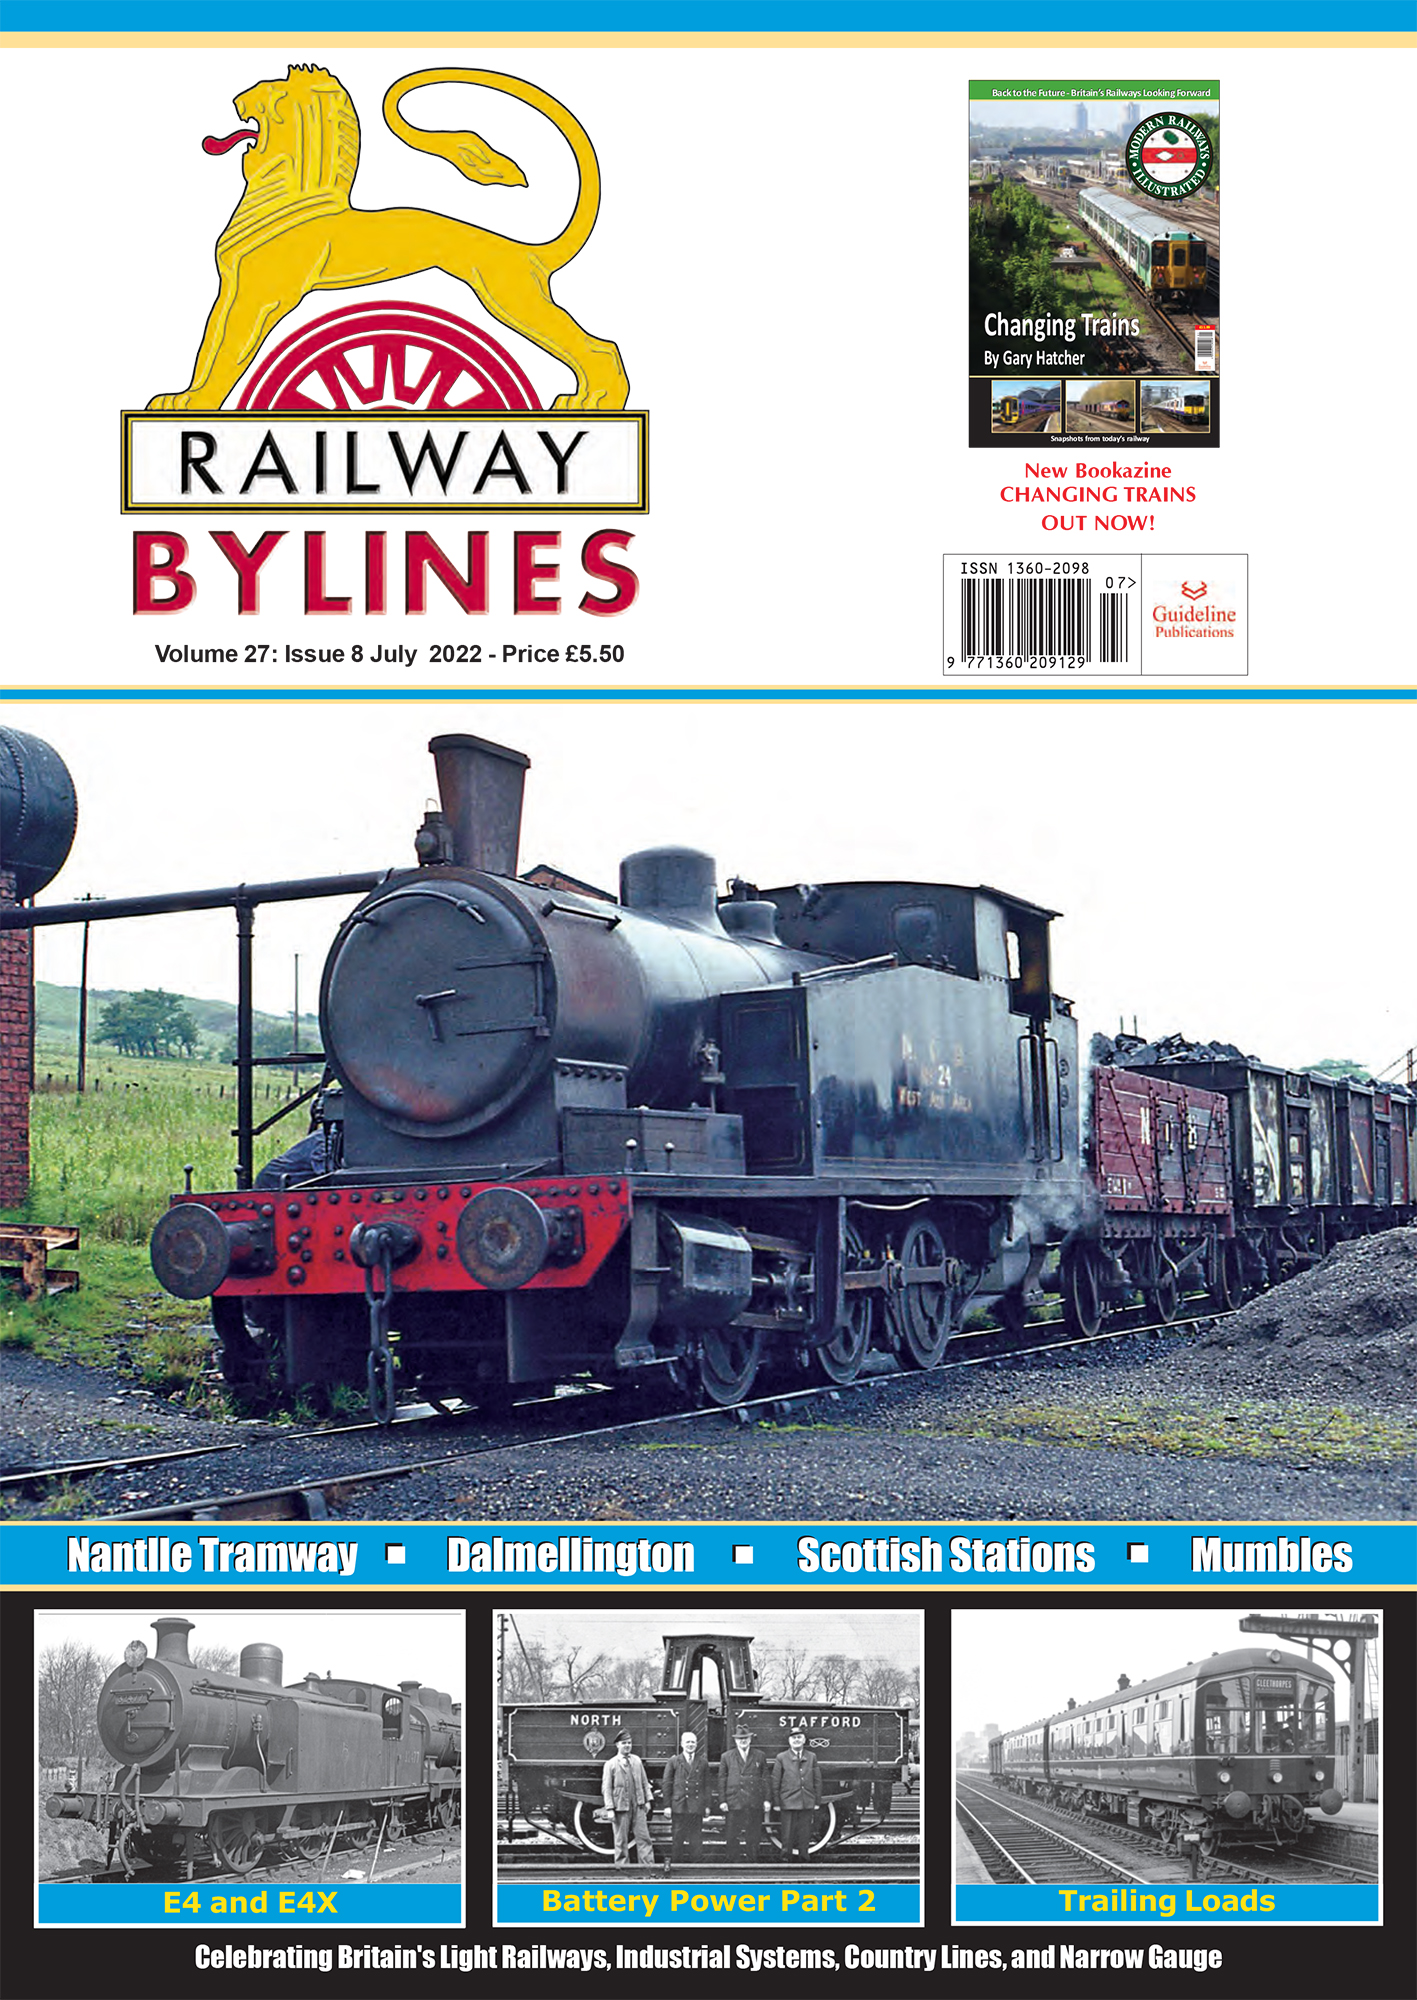 Guideline Publications Ltd Railway Bylines  vol 27 - issue 08 June 22 